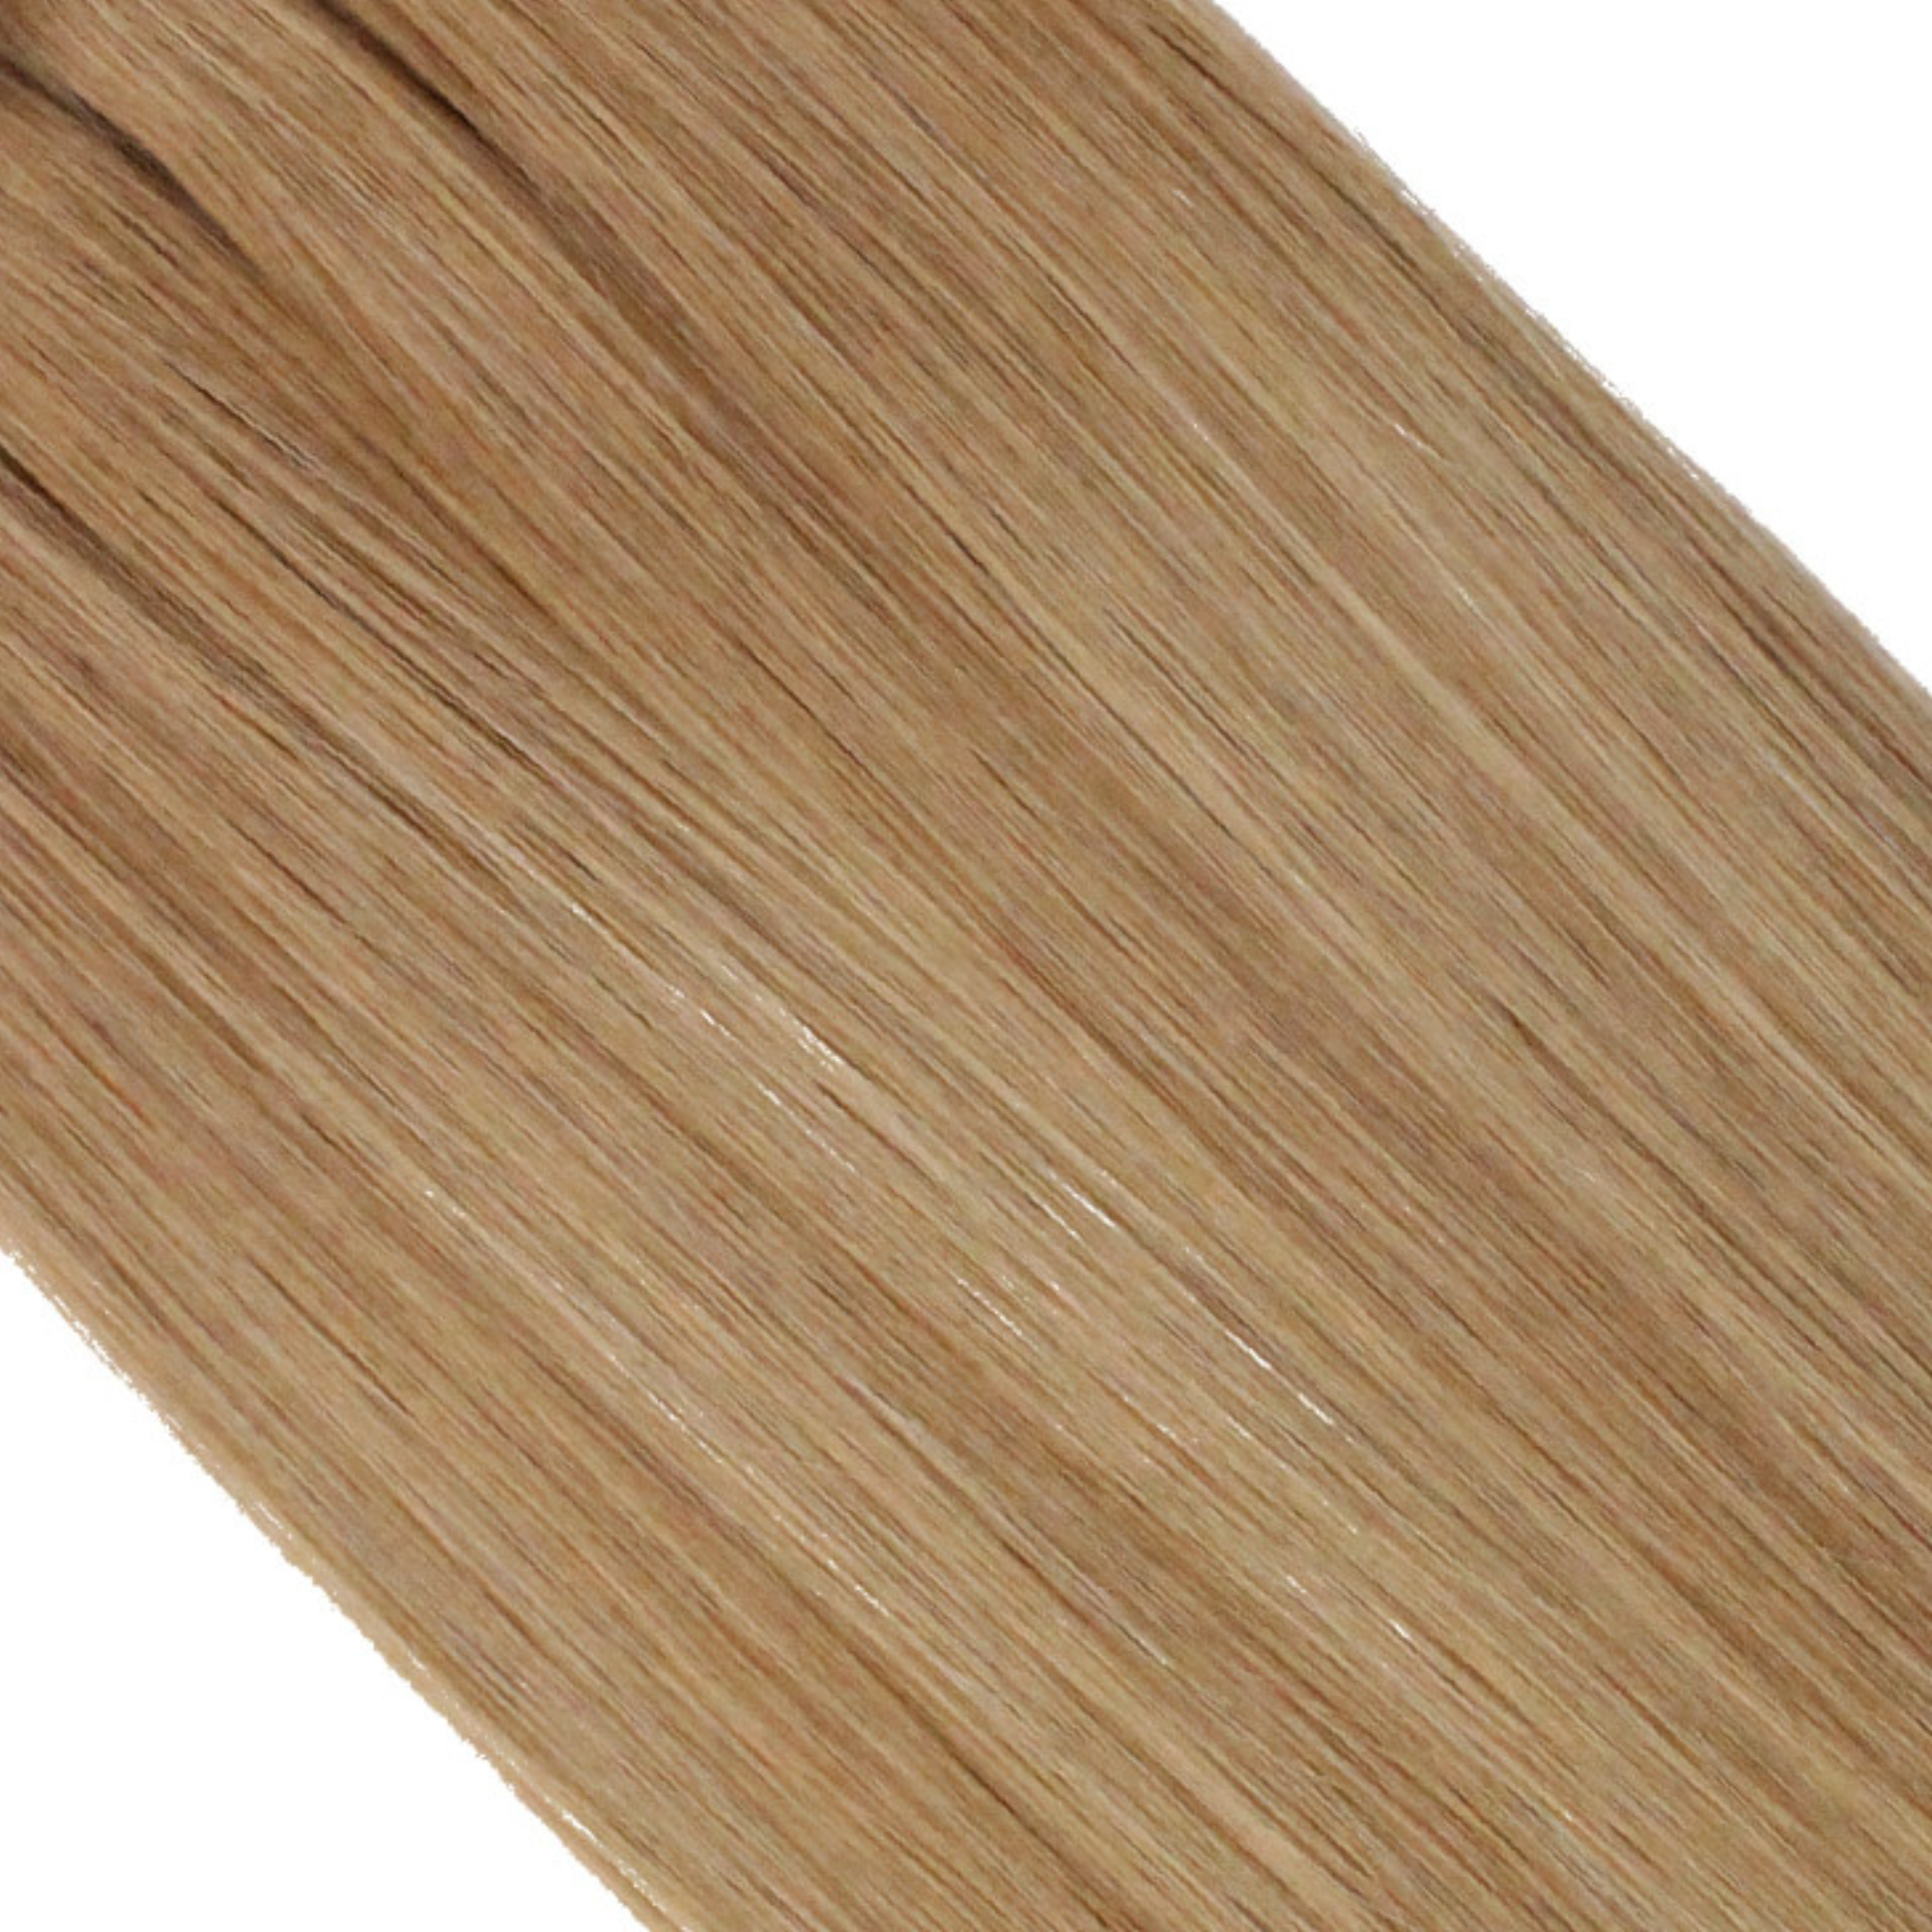 "hair rehab london 18" tape hair extensions shade swatch titled rooted mocha"